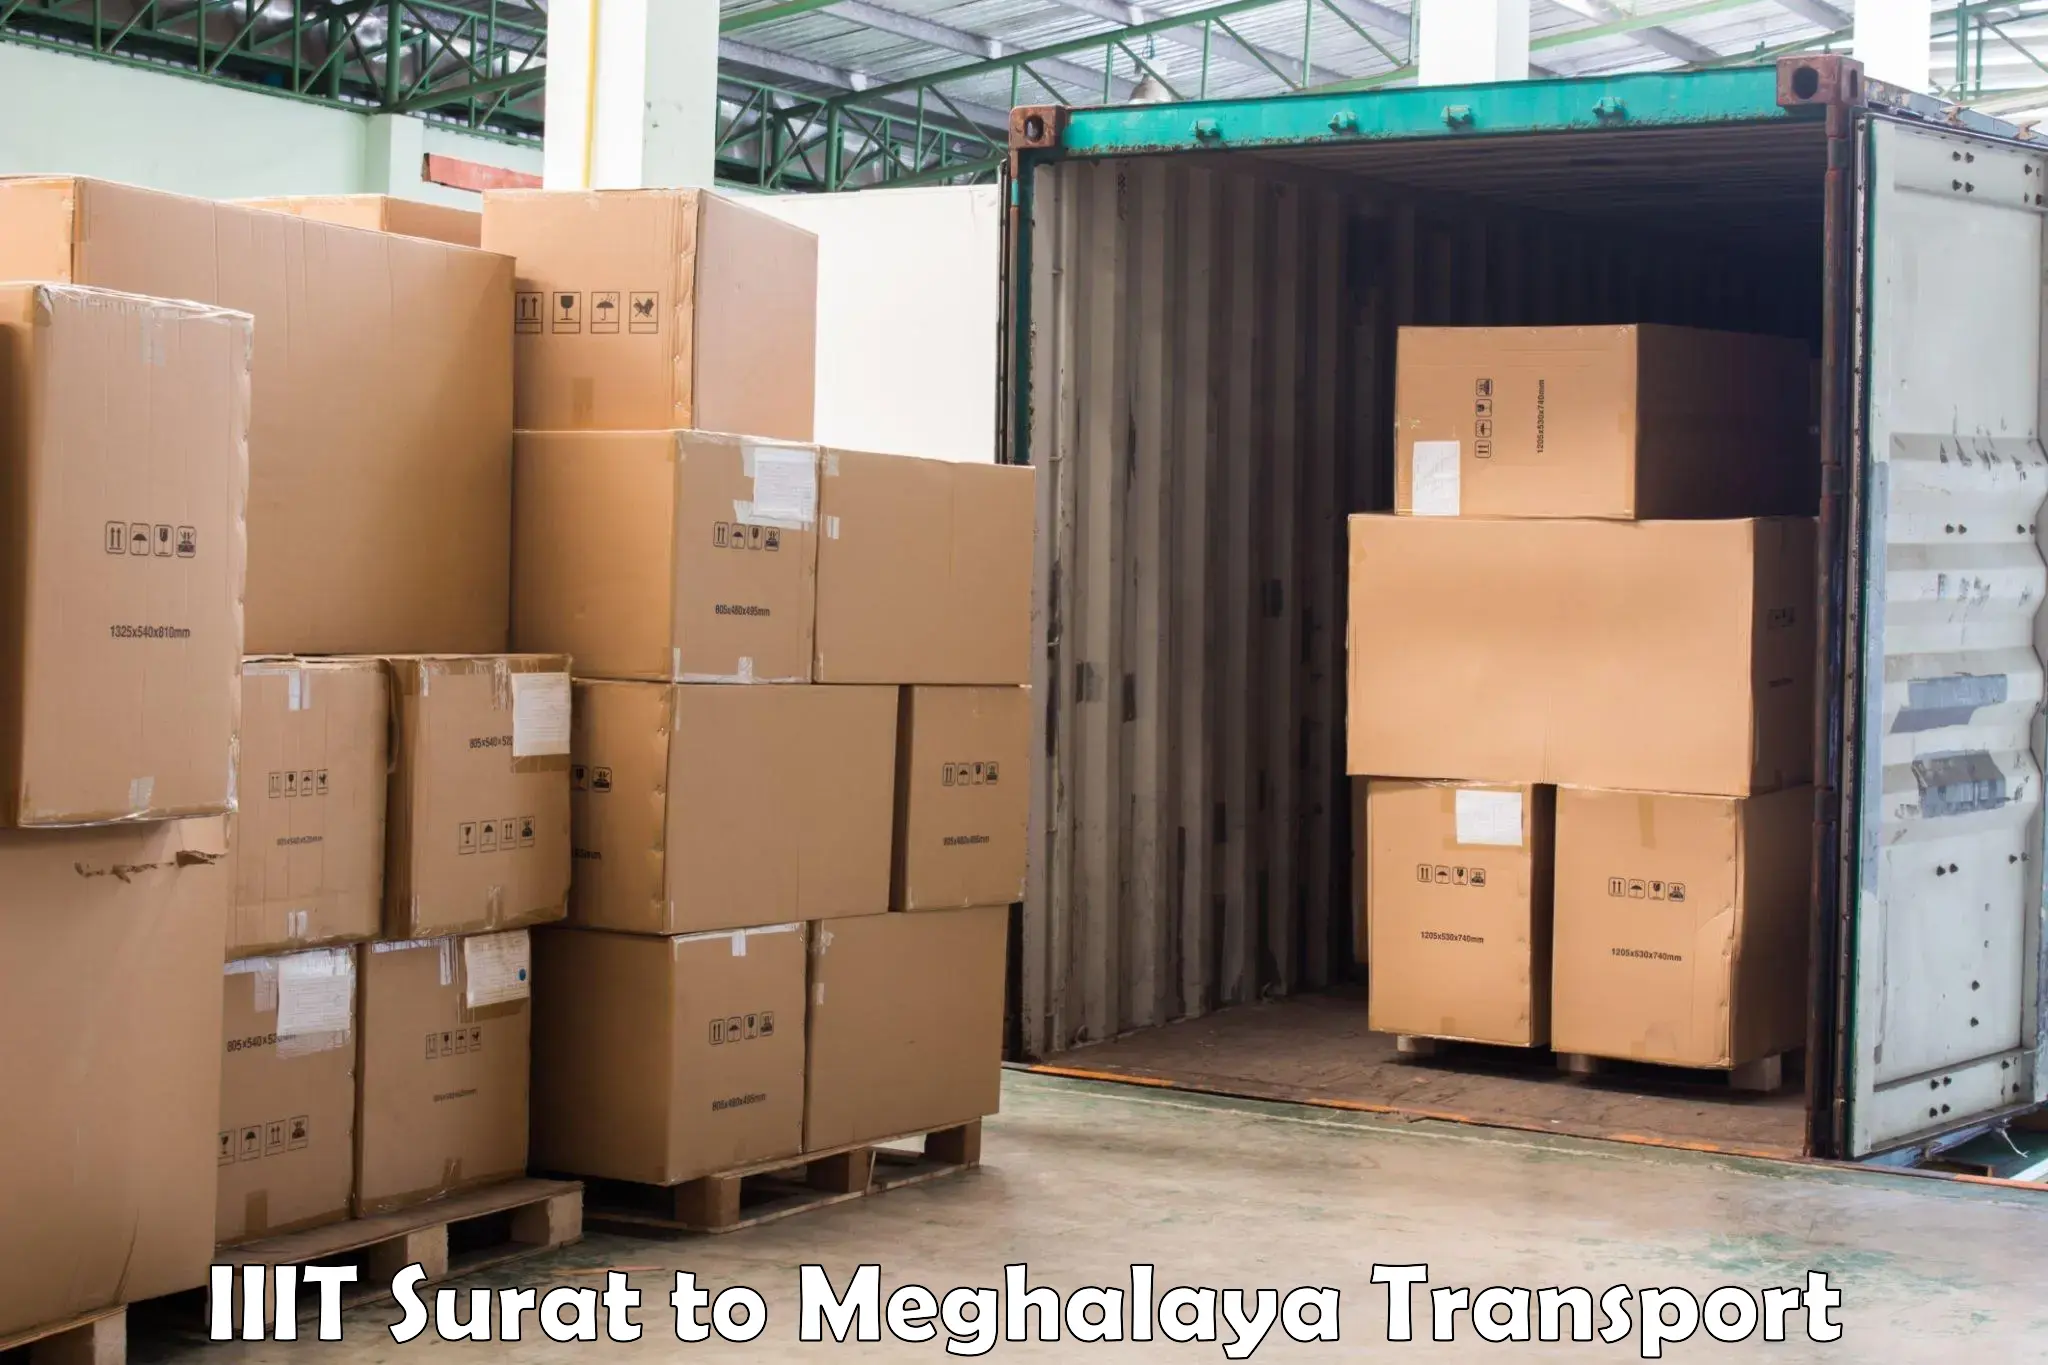 Express transport services IIIT Surat to Tura